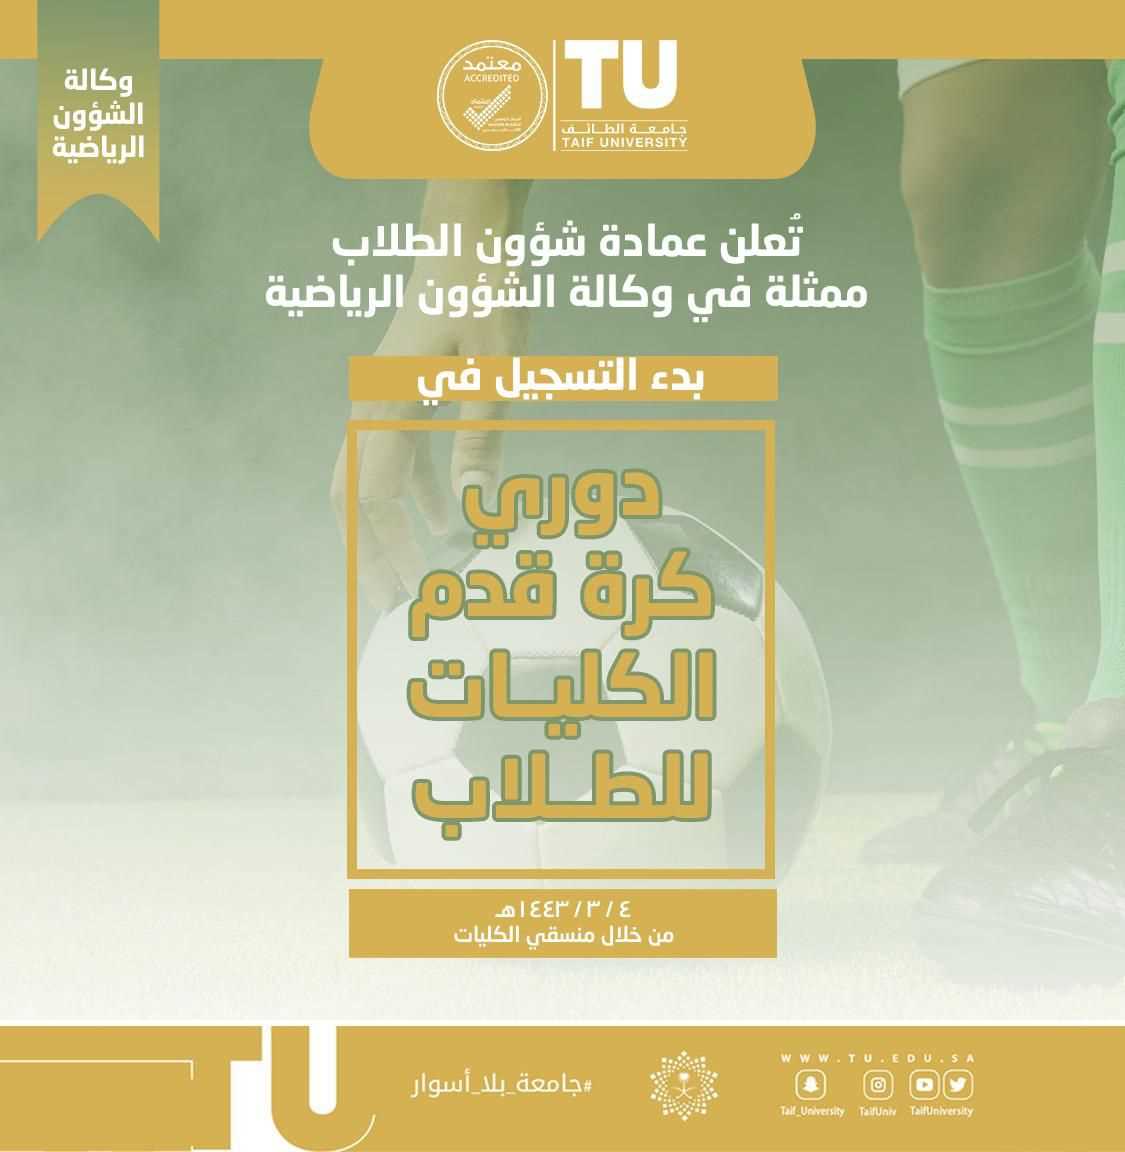  invite students to participate in the university football championship